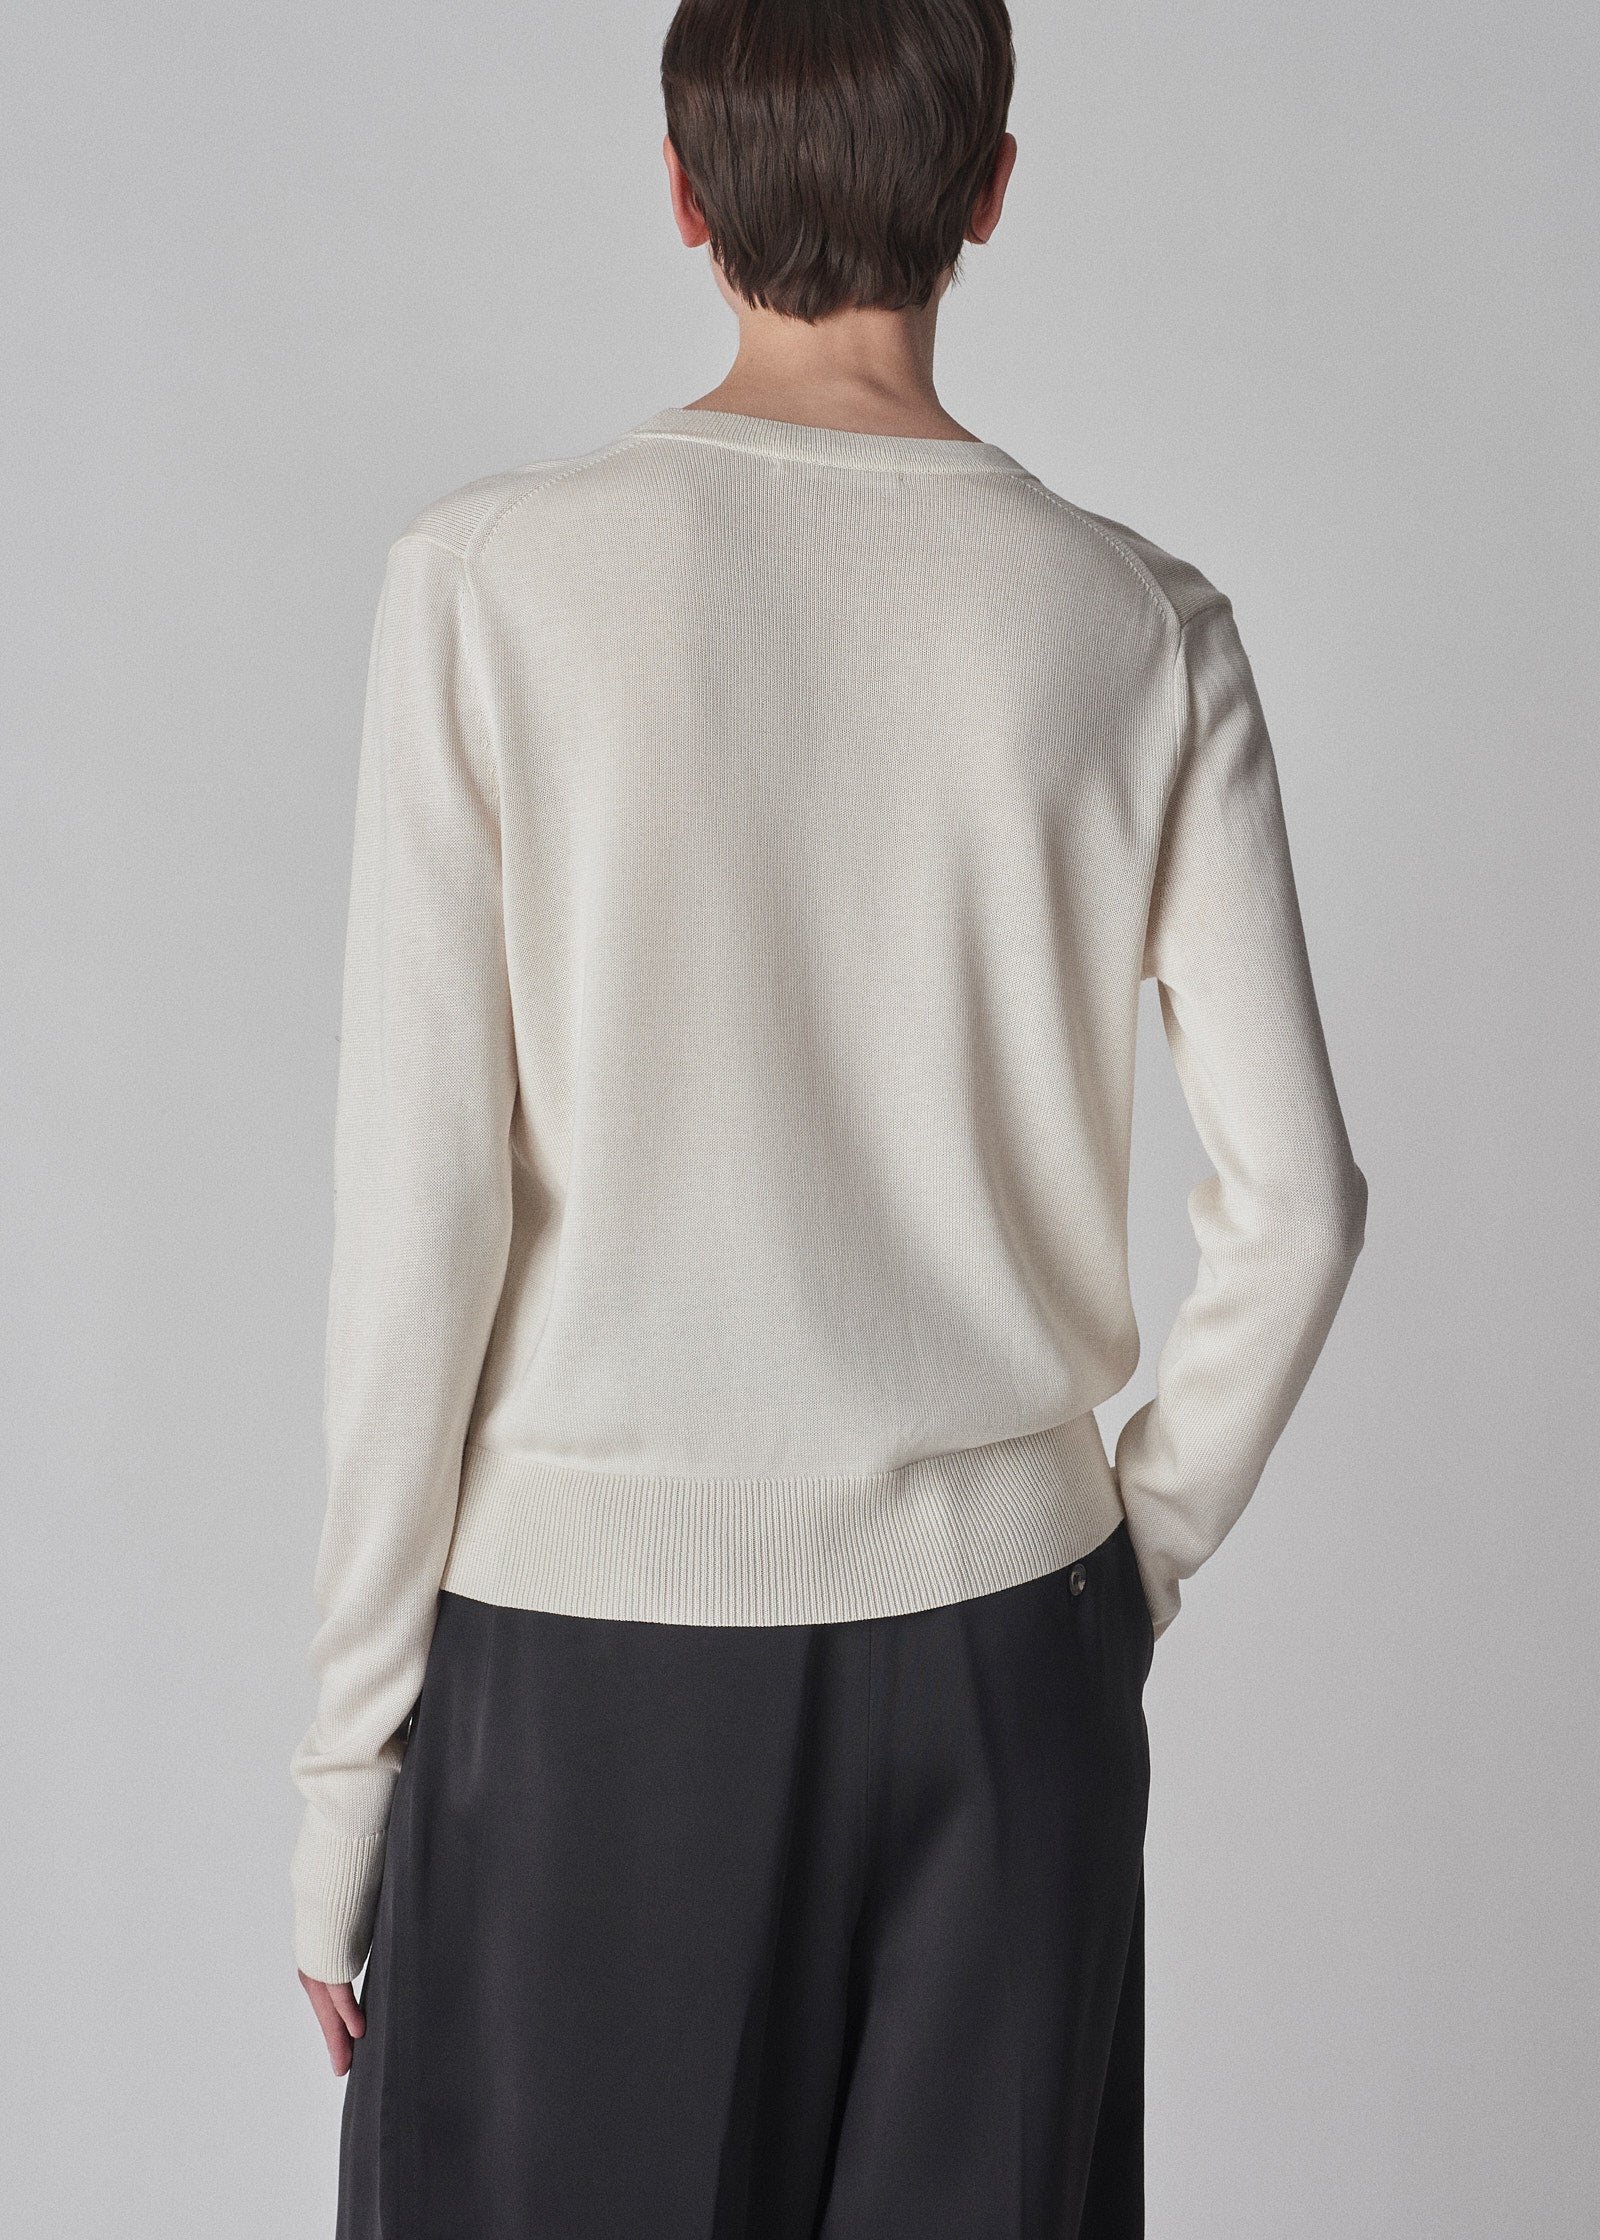 V-Neck Cardigan in Silk Knit - Ivory - CO Collections